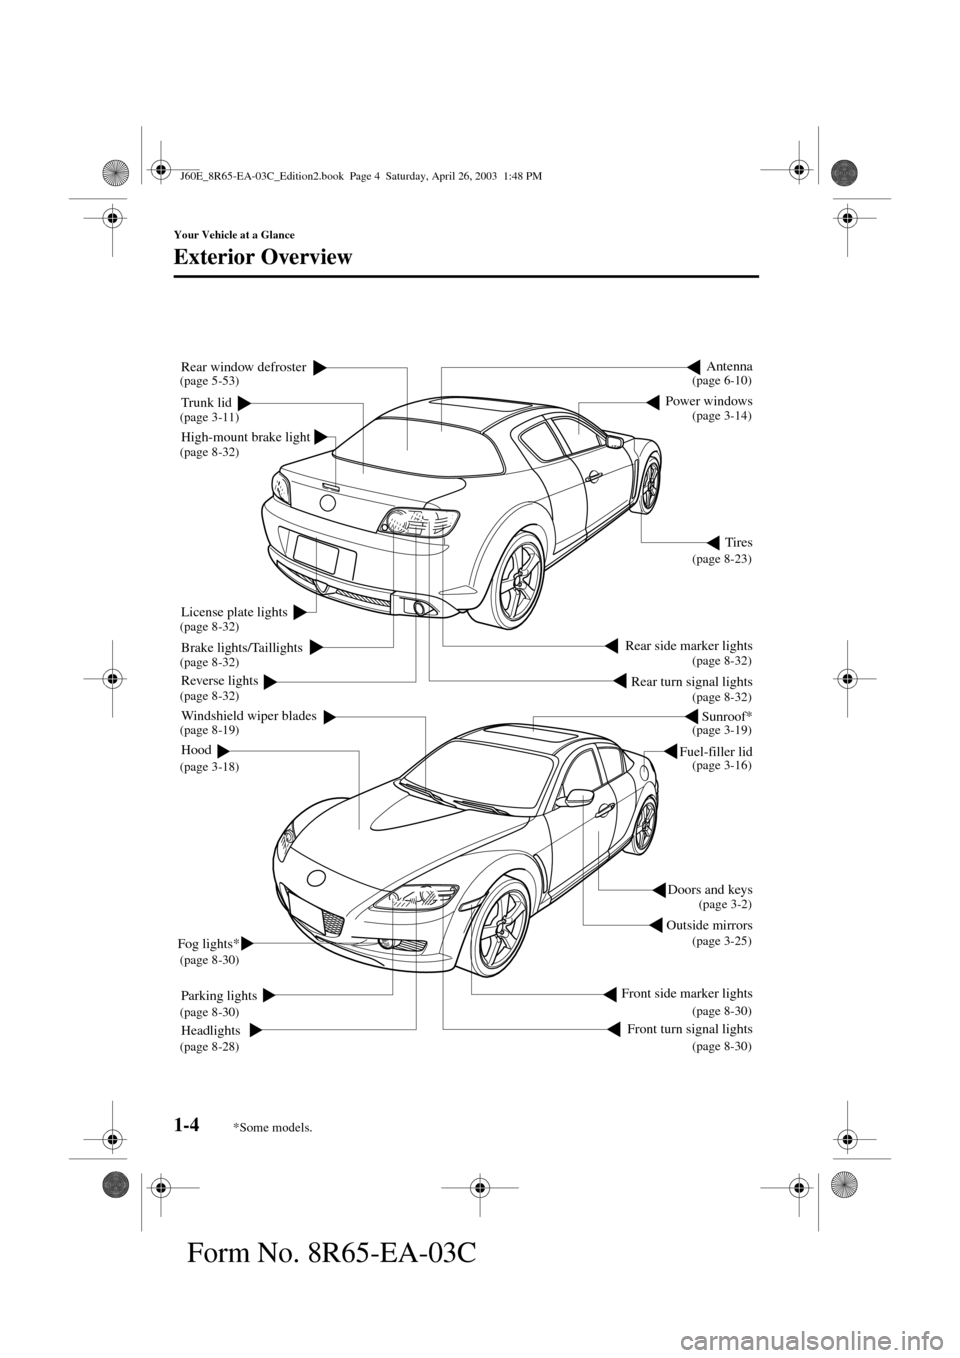 MAZDA MODEL RX 8 2004  Owners Manual (in English) 1-4
Your Vehicle at a Glance
Form No. 8R65-EA-03C
Exterior Overview
Doors and keys
Outside mirrorsFuel-filler lidTires
Front turn signal lightsRear turn signal lights Brake lights/TaillightsPower wind